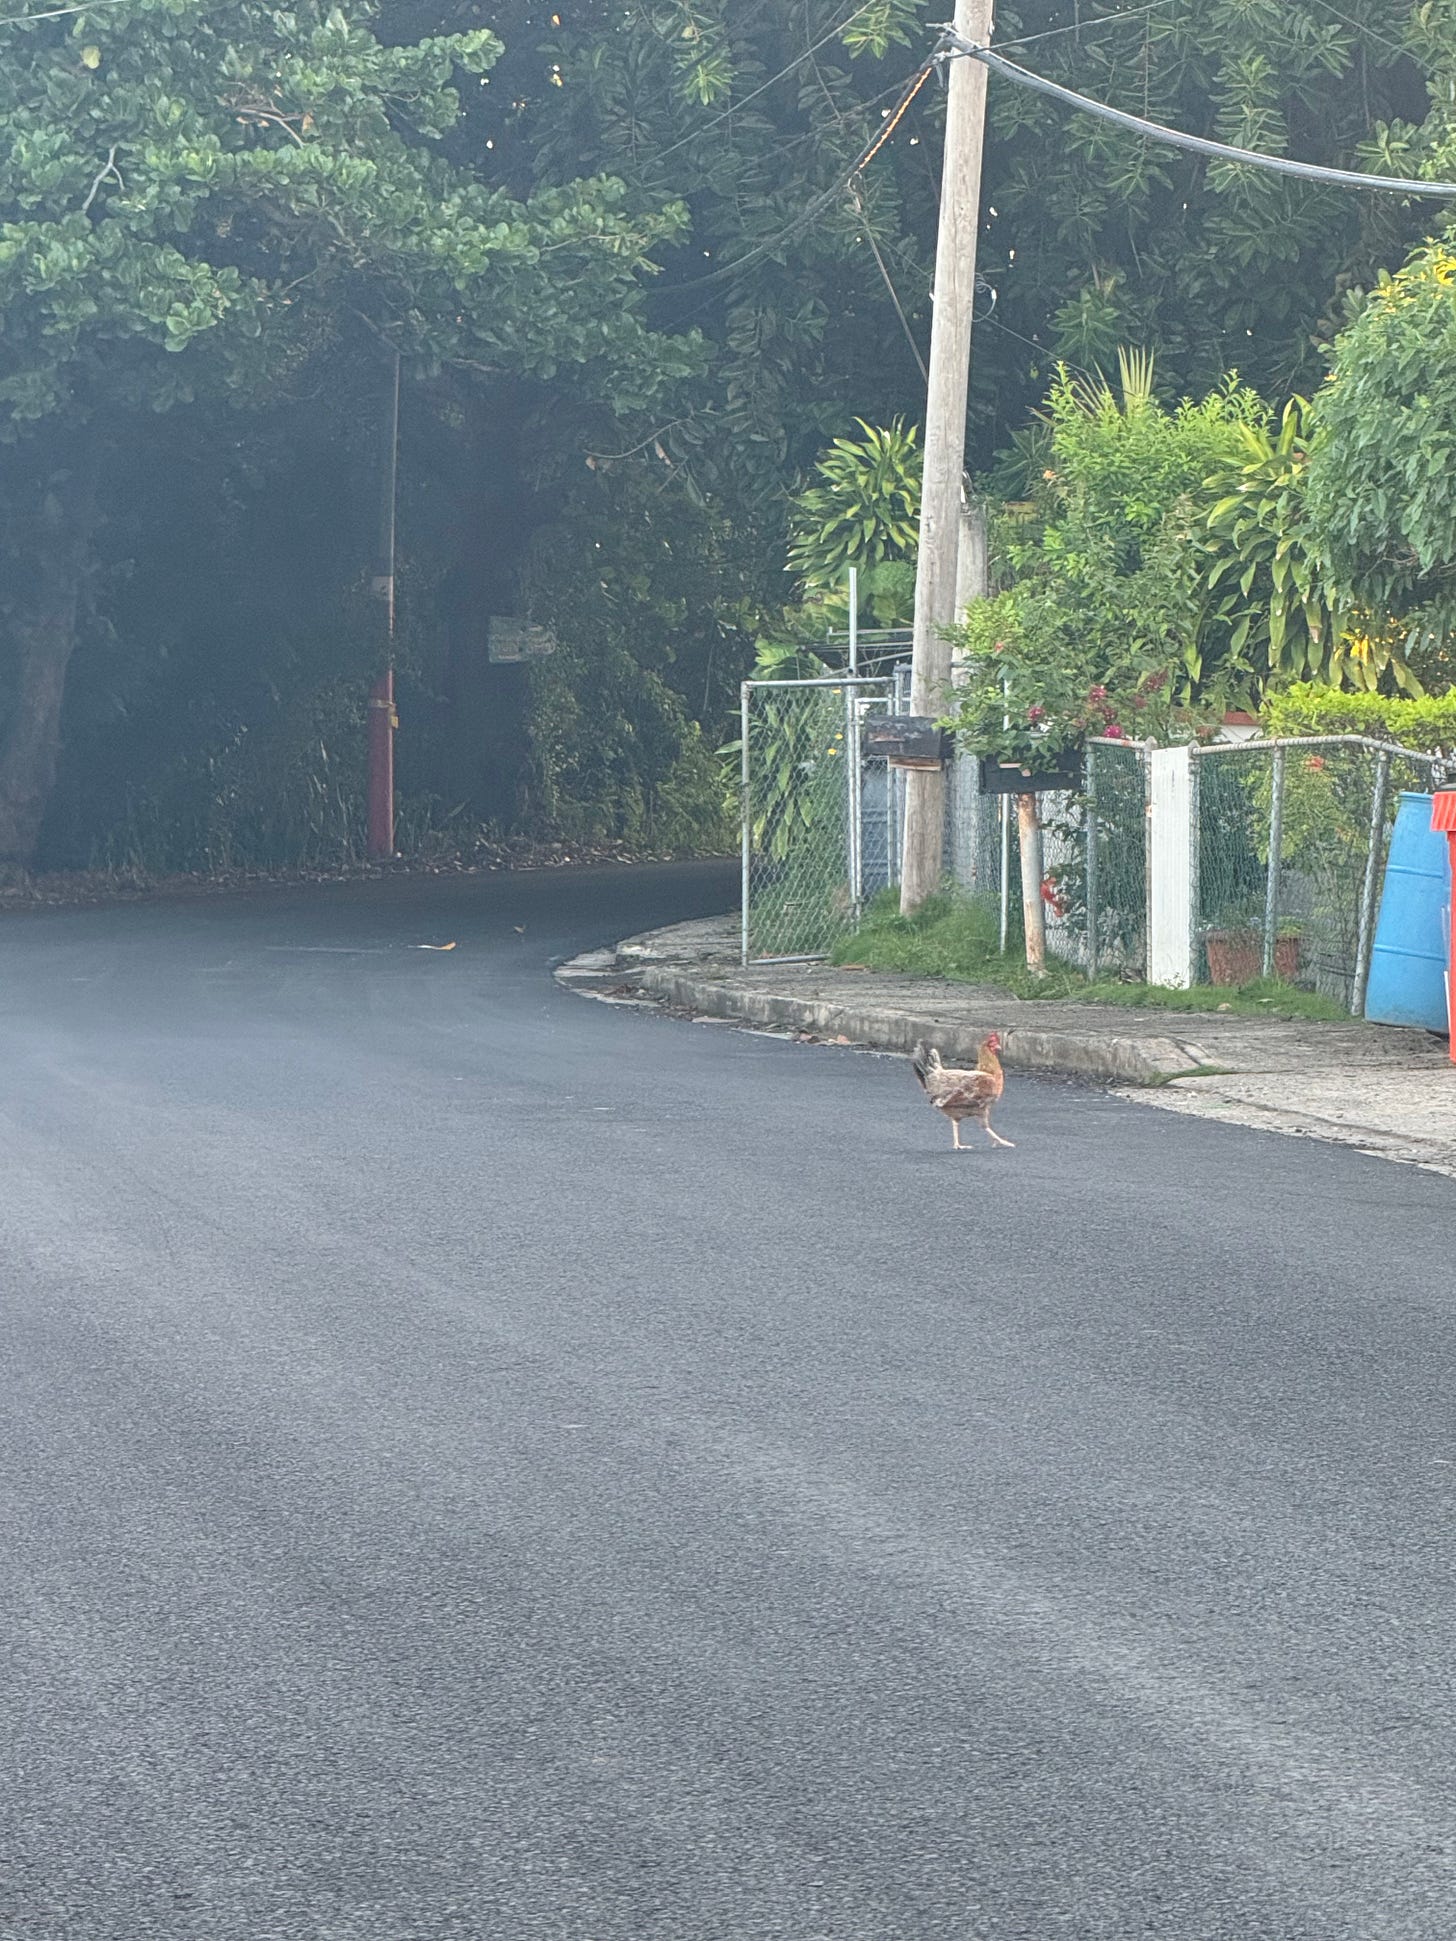 An orange and white rooster crosses a black asphalt road towards a chain link fence. In the background is lush green trees and plants 